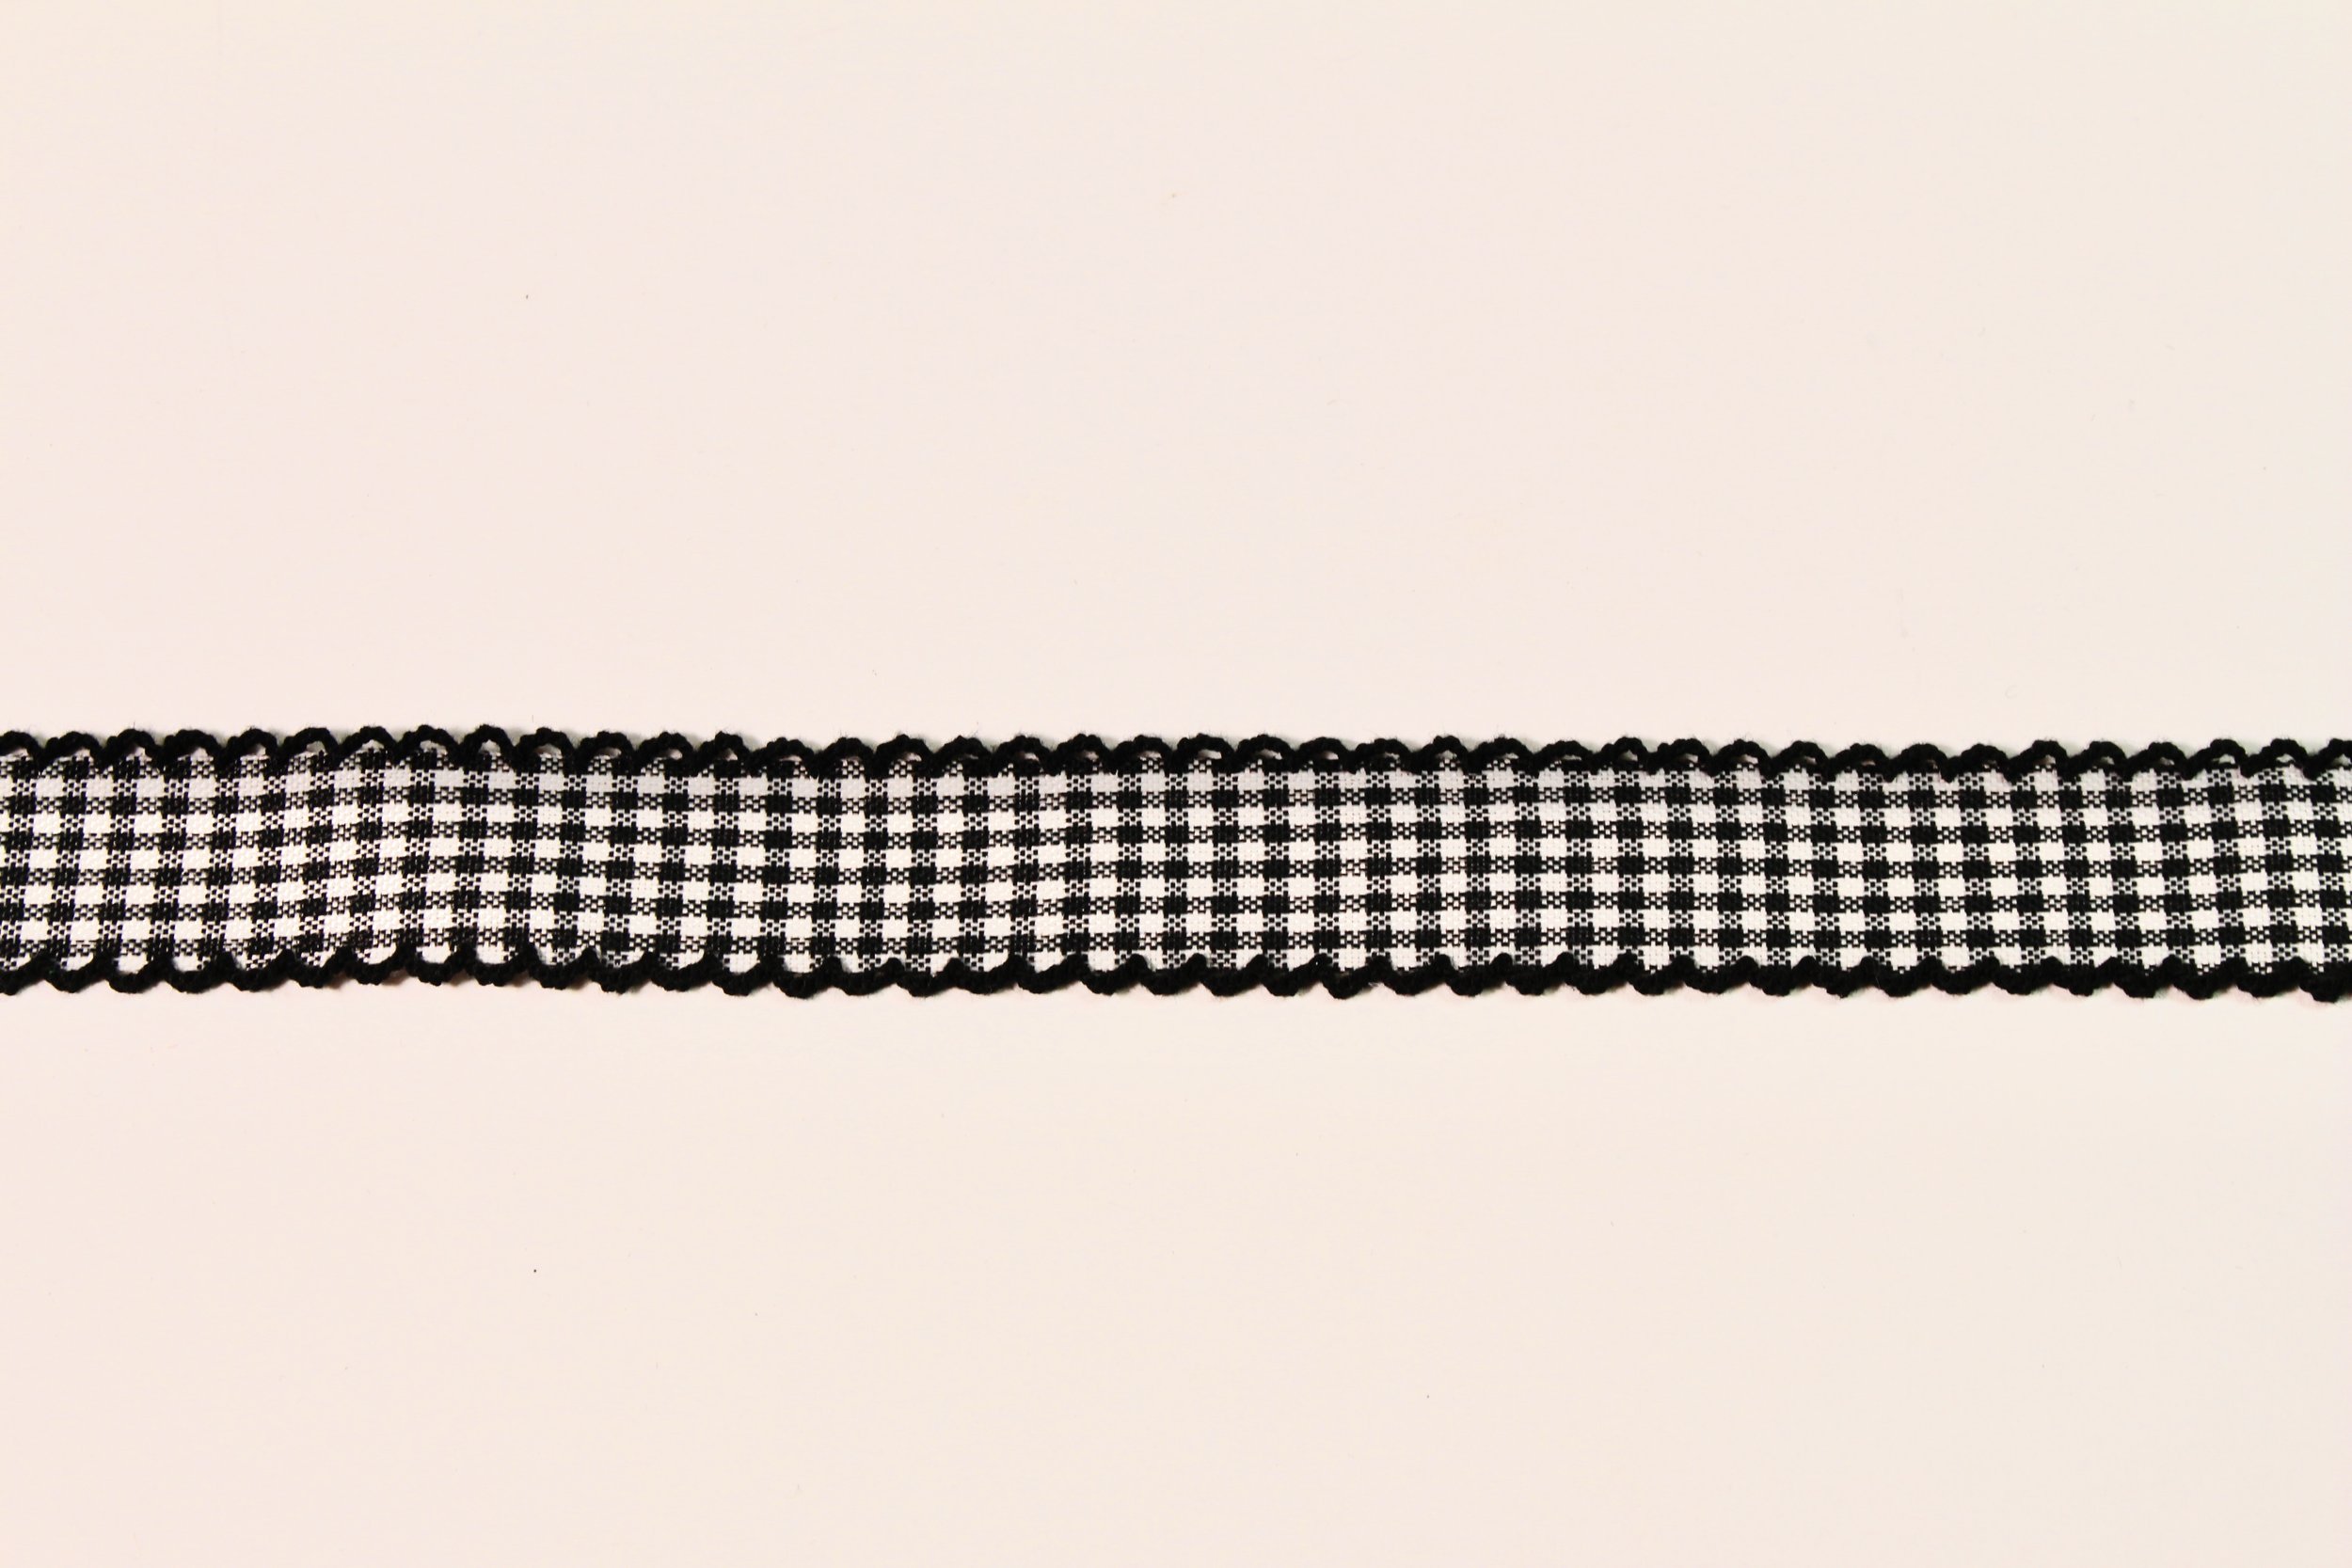 Gingham Ribbon with Picot Edge - $6.00 for piece — Sarah Veblen